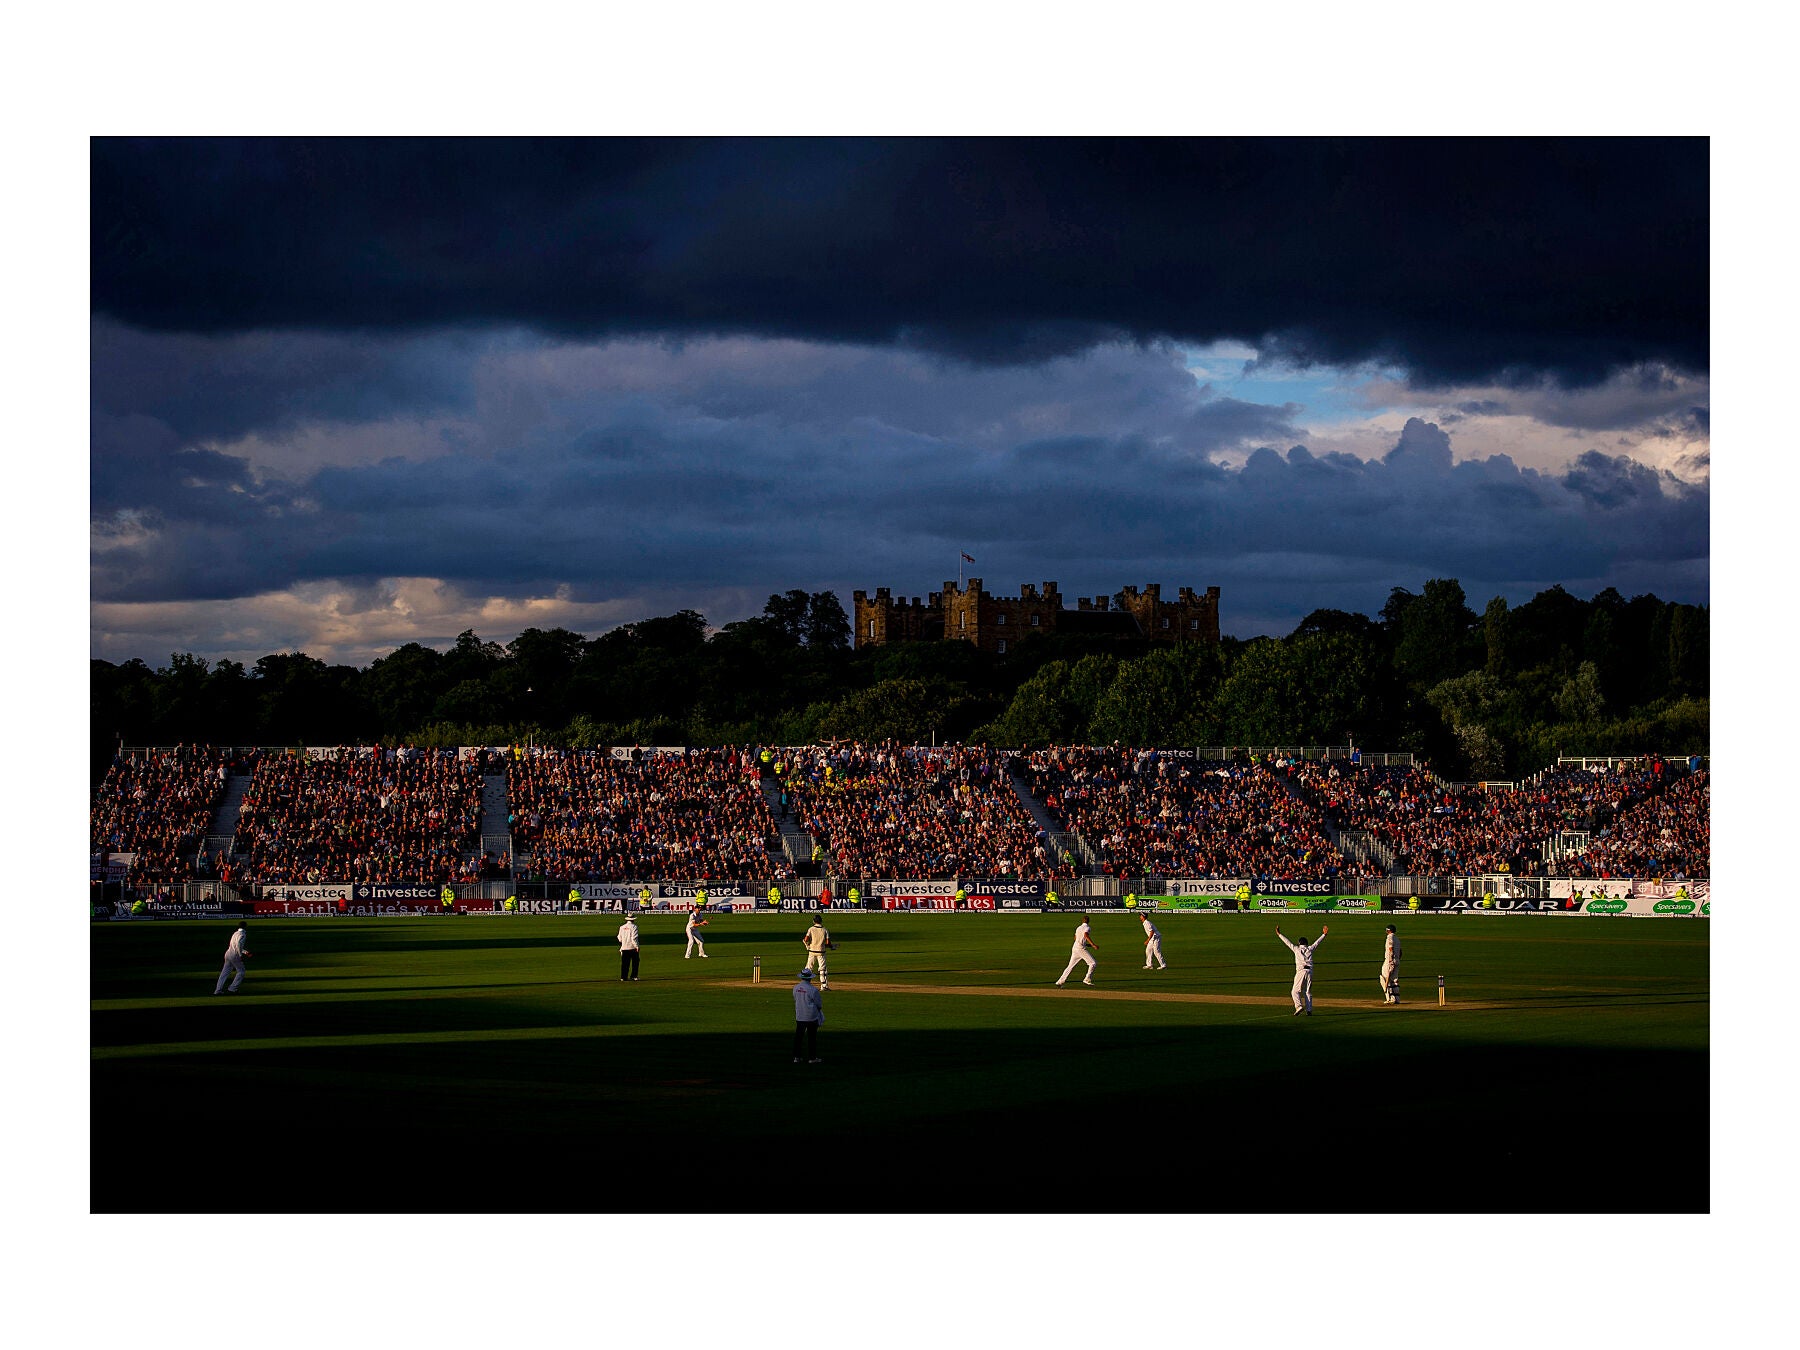 England win the Ashes, Durham – 12 August 2013